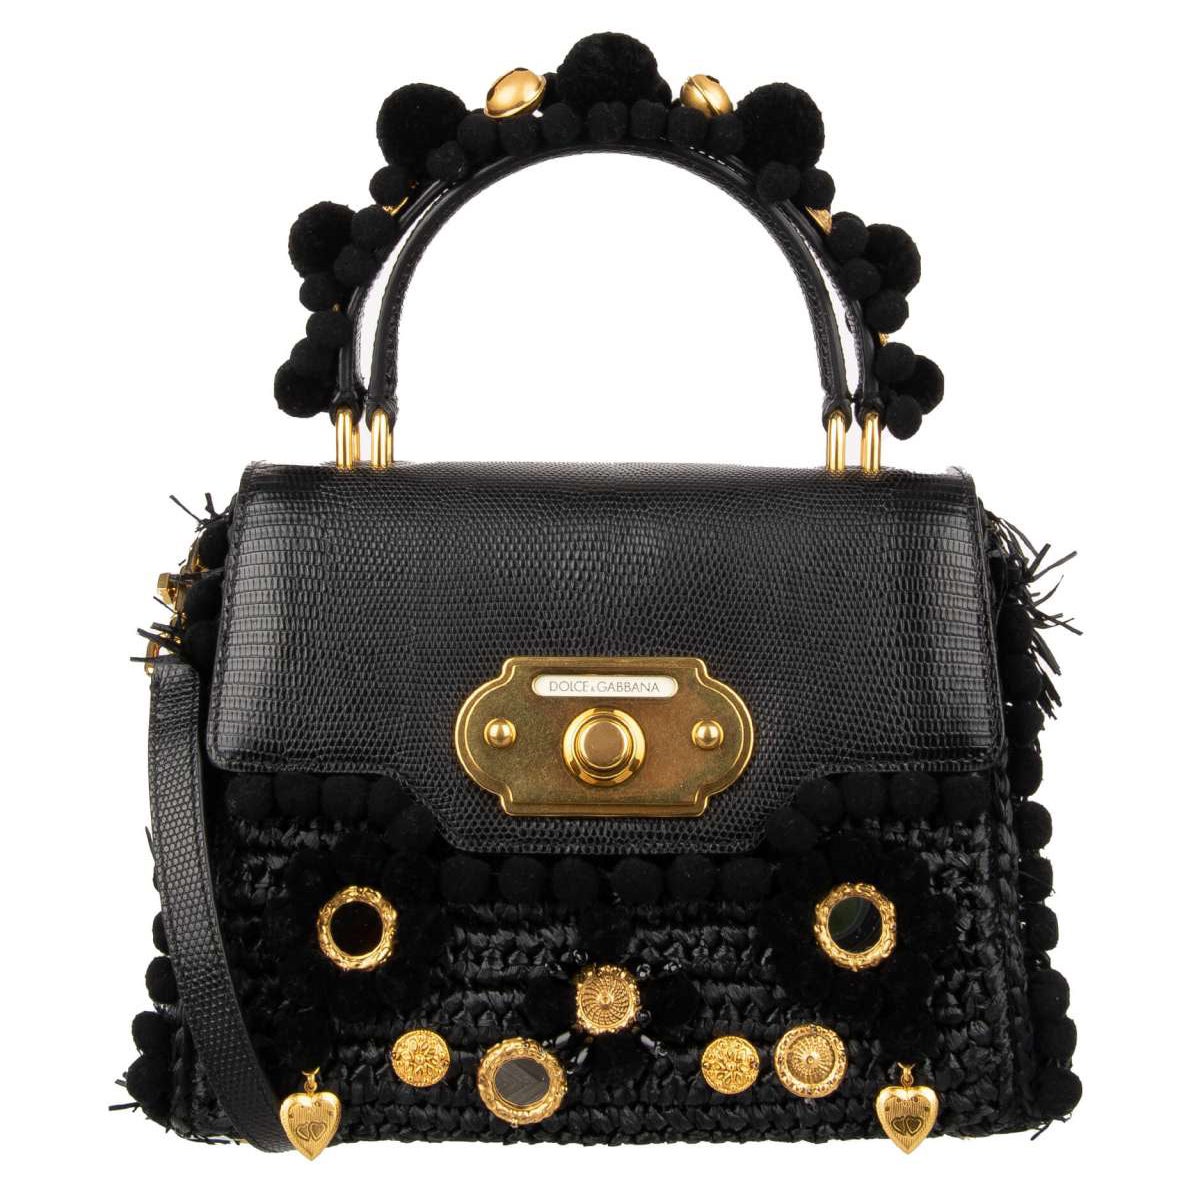 D&G - Raffia and Leather Tote Bag WELCOME with Charms and Pompoms Black For Sale